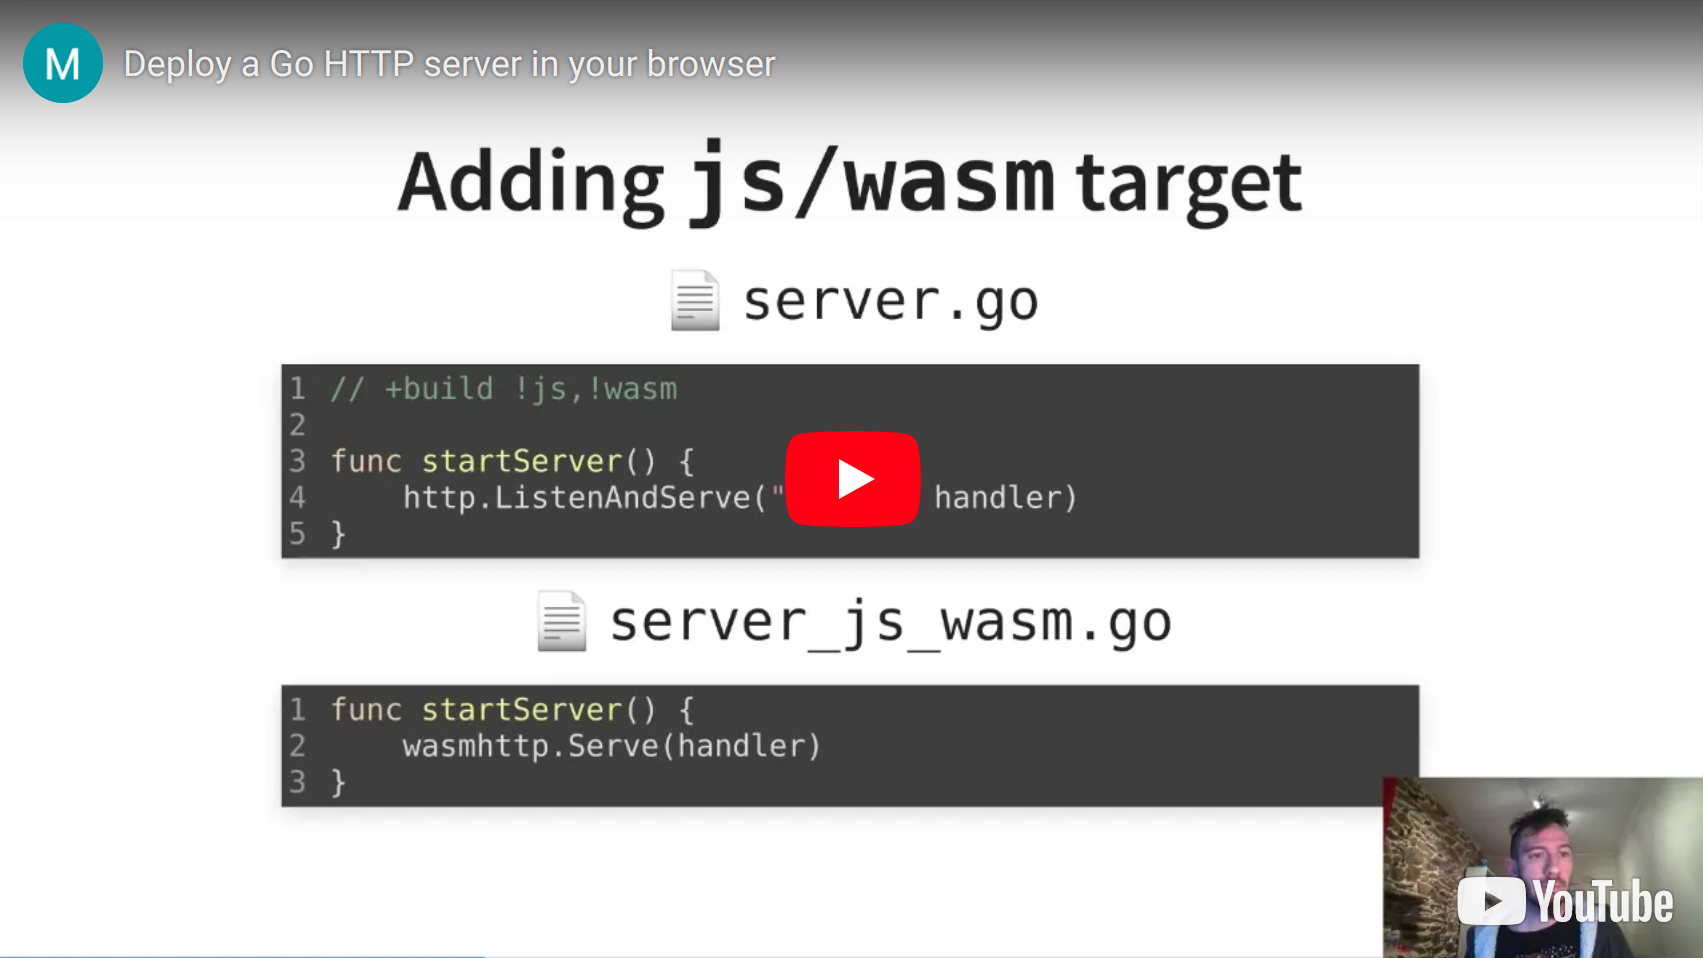 Deploy a Go HTTP server in your browser Youtube link